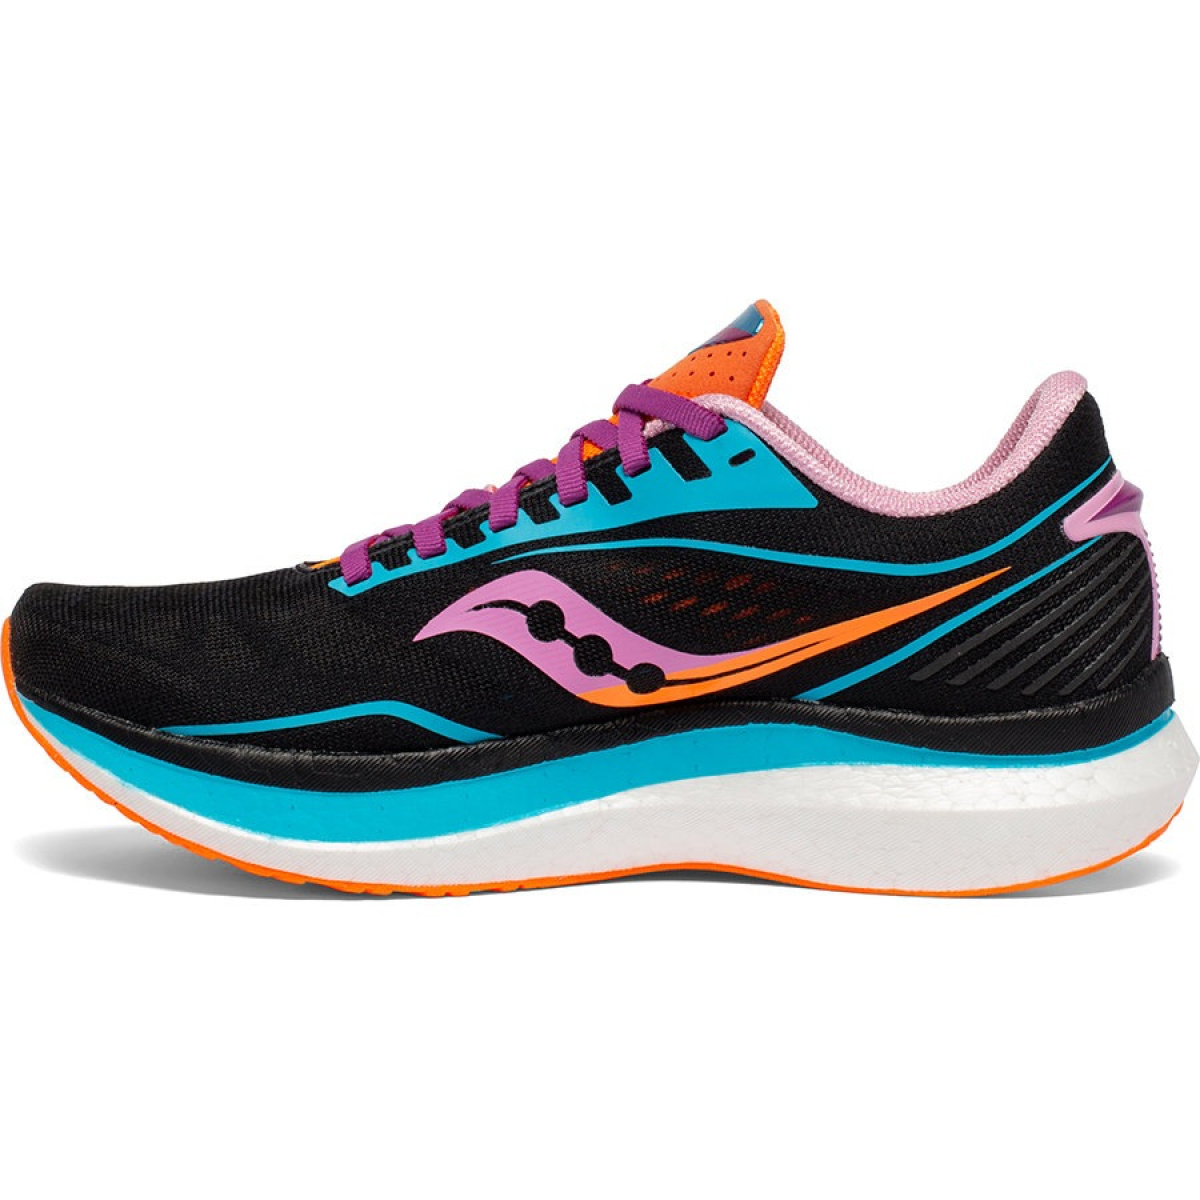 Saucony endorphin Speed road running shoe at Fast and Light CH 3